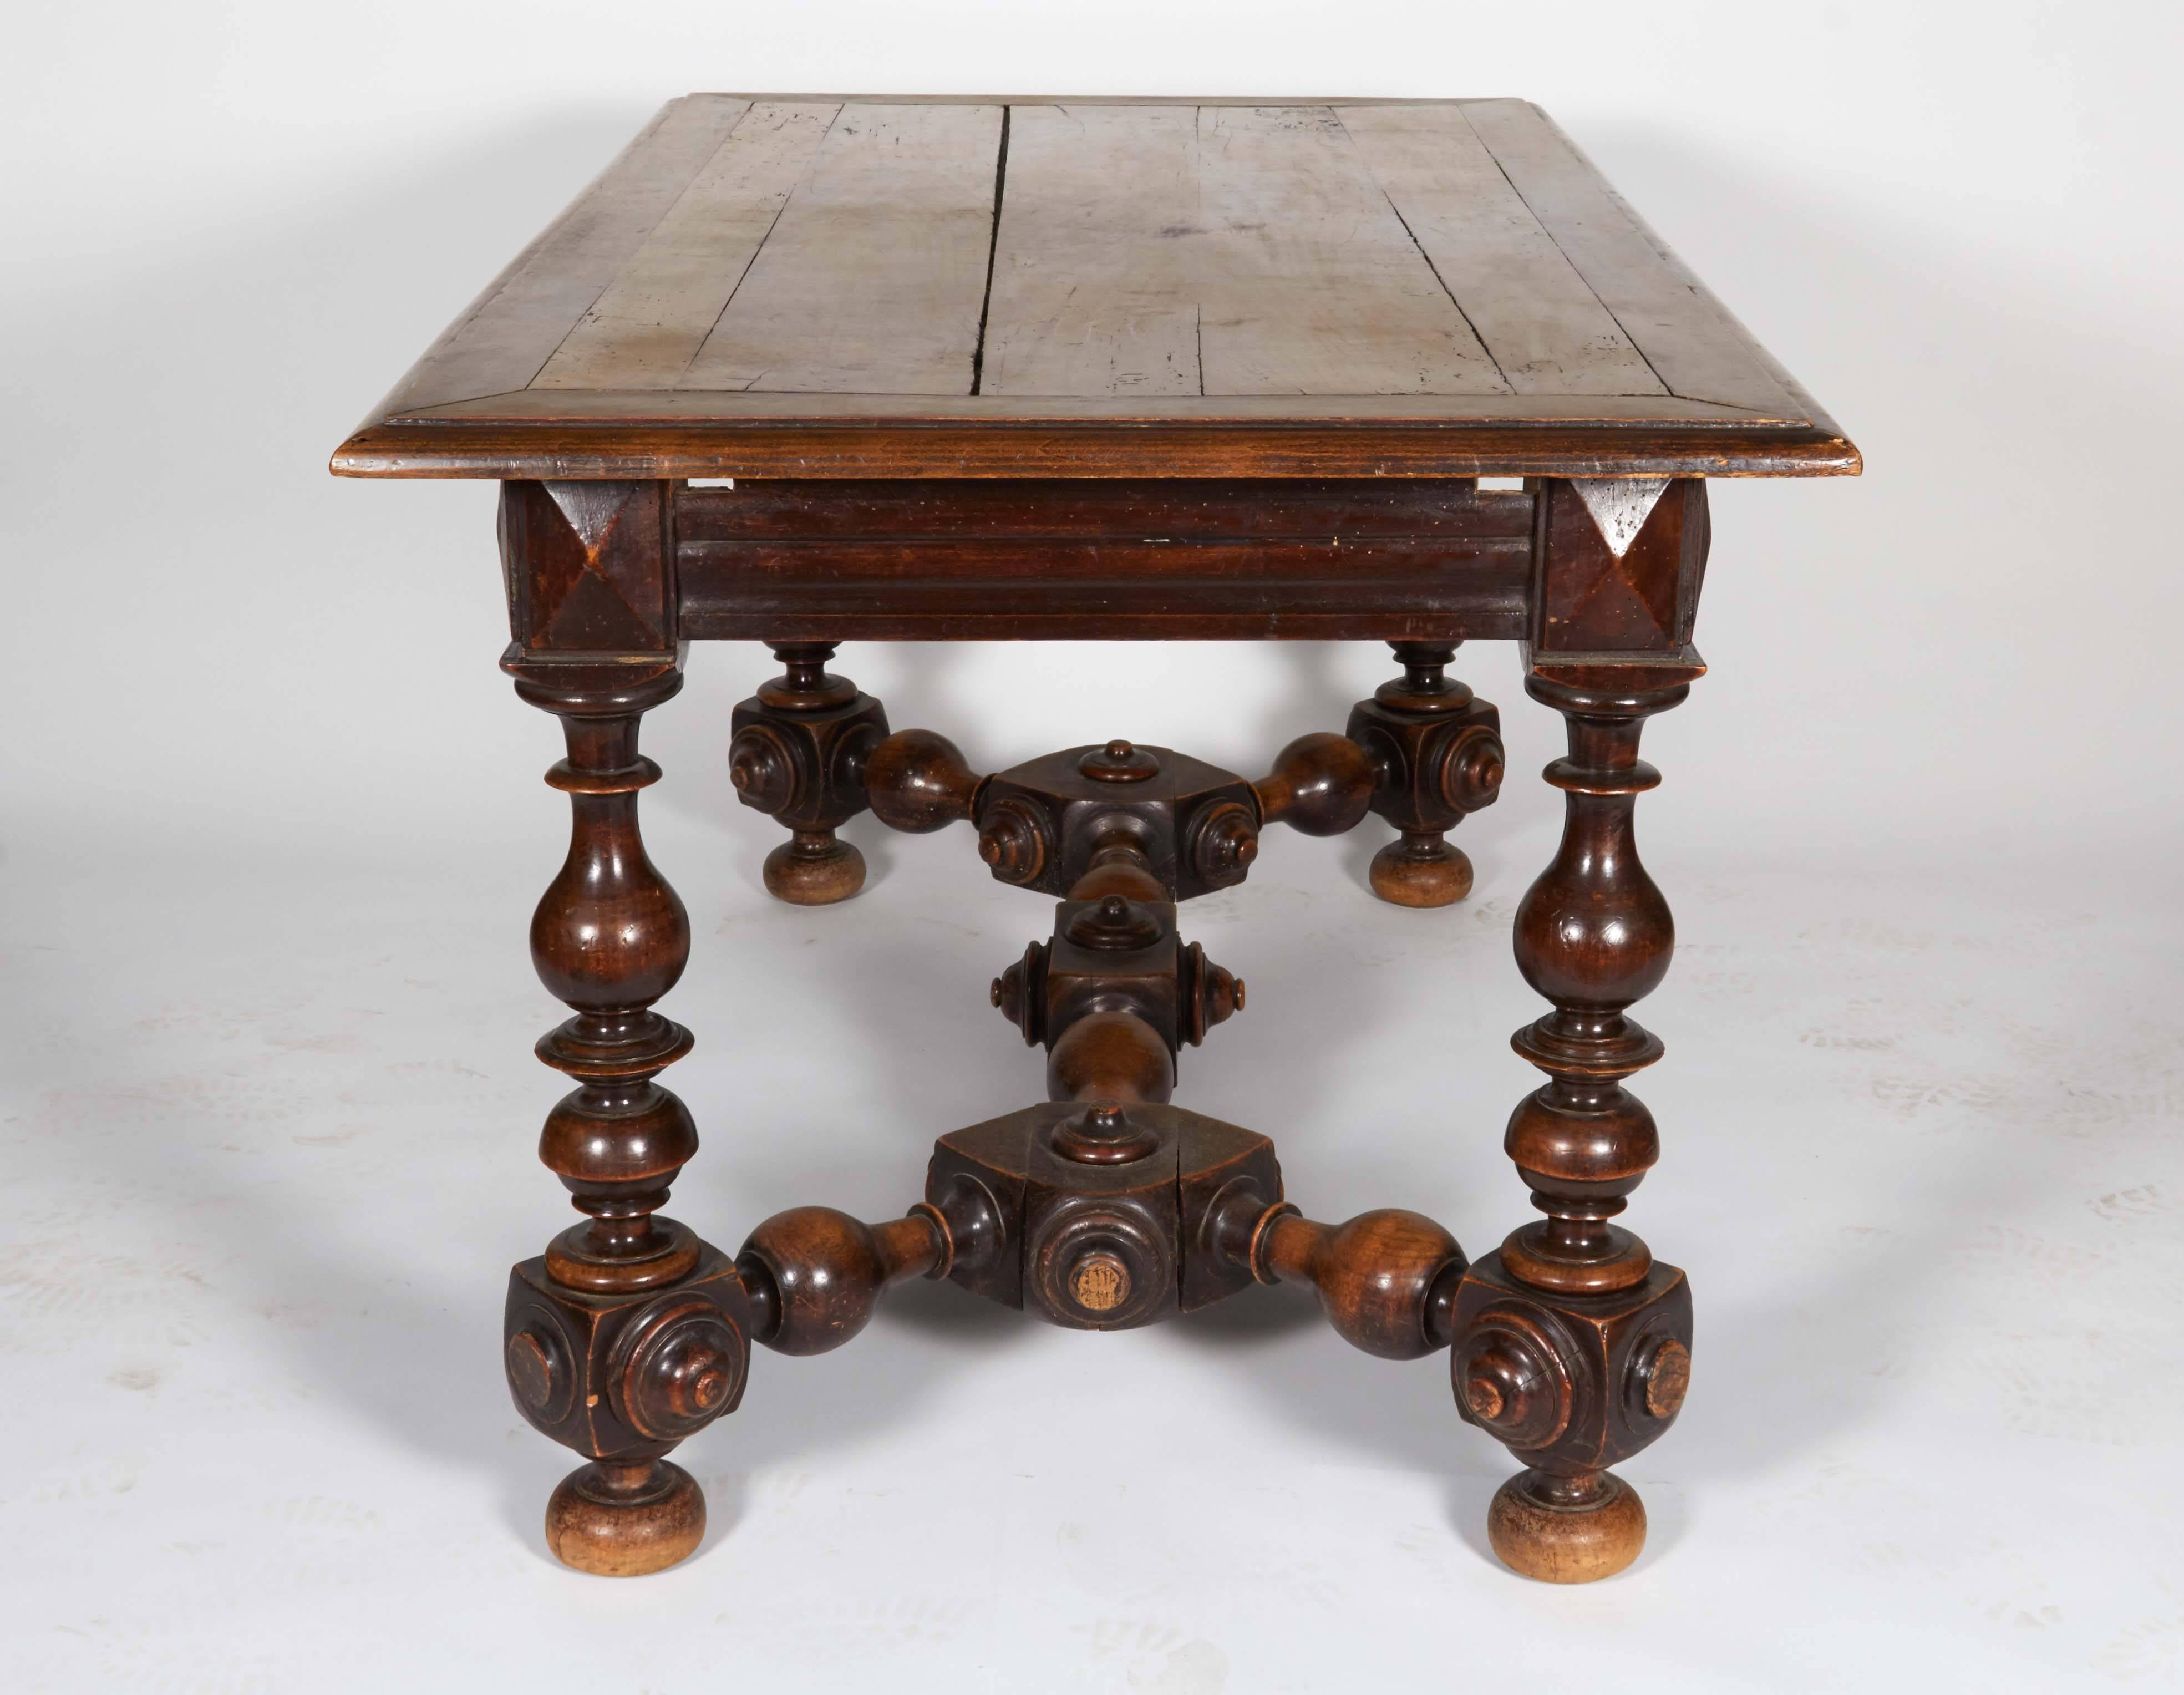 Wood Table with Ornate Legs 1